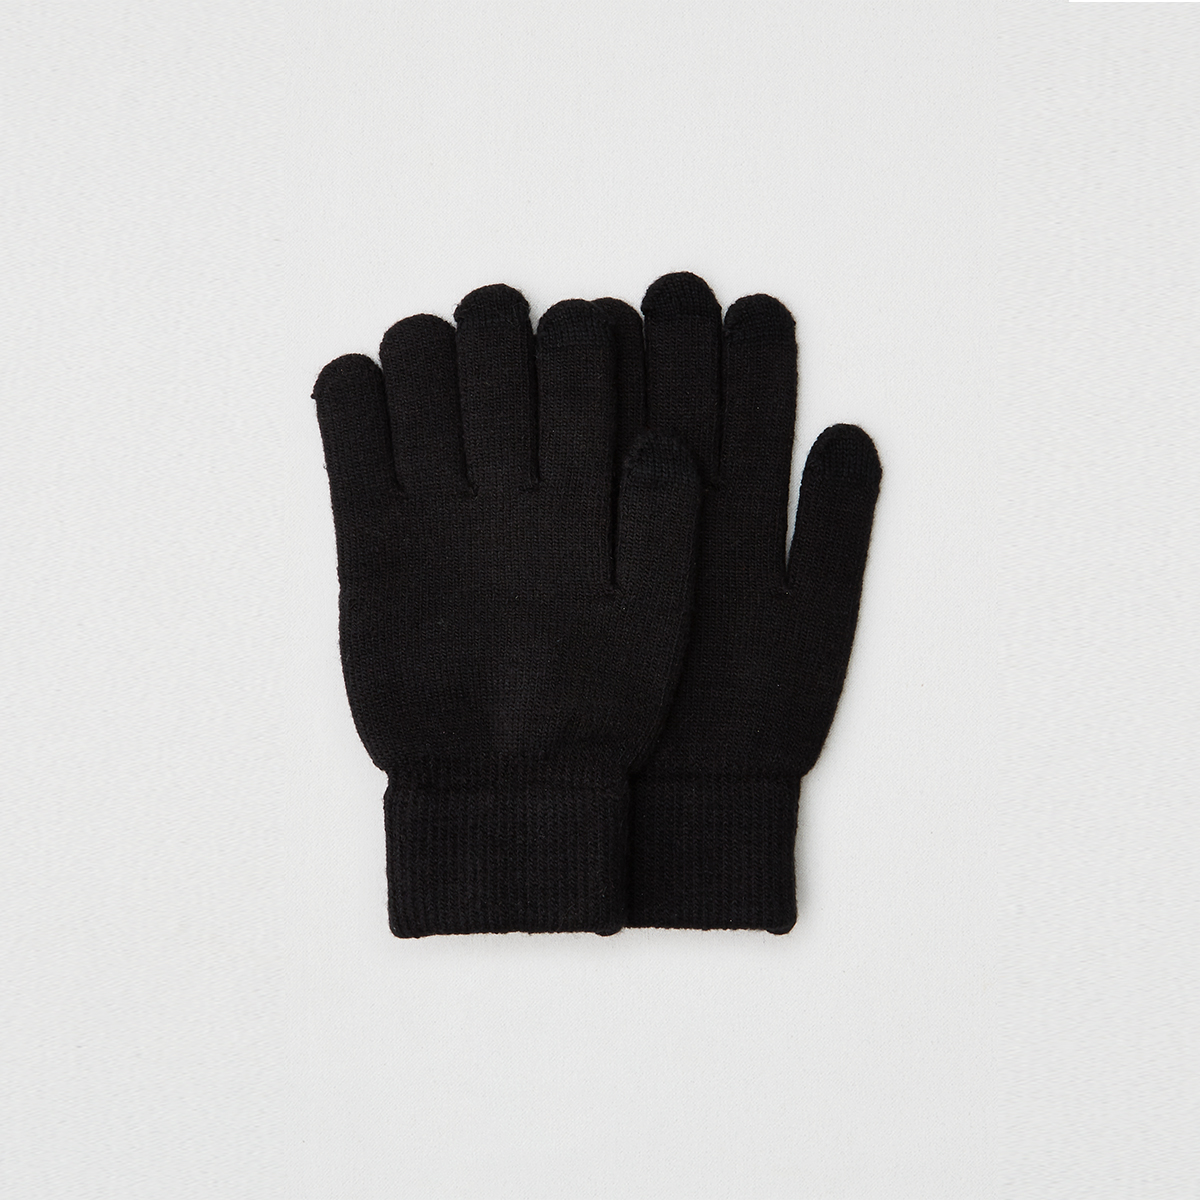 American Eagle Touch Screen Gloves ถุงมือ ผู้ชาย ทัชสกรีน(022-6281-001)